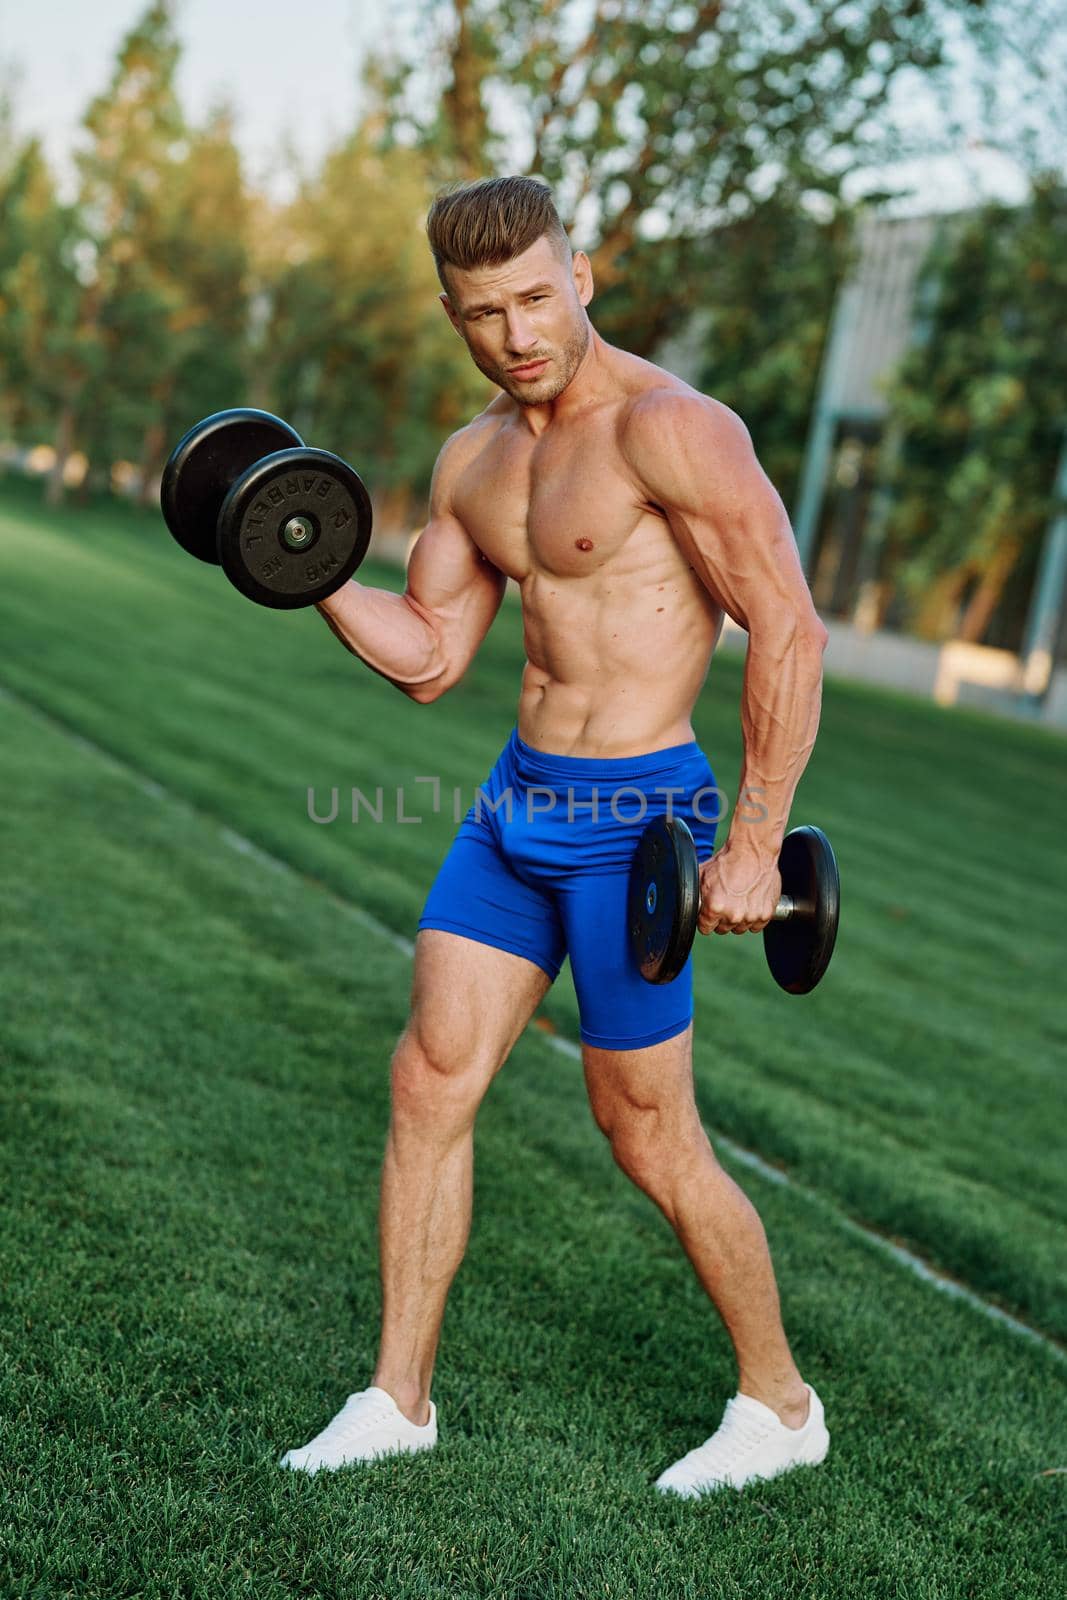 sporty man with pumped up body in park workout exercise. High quality photo